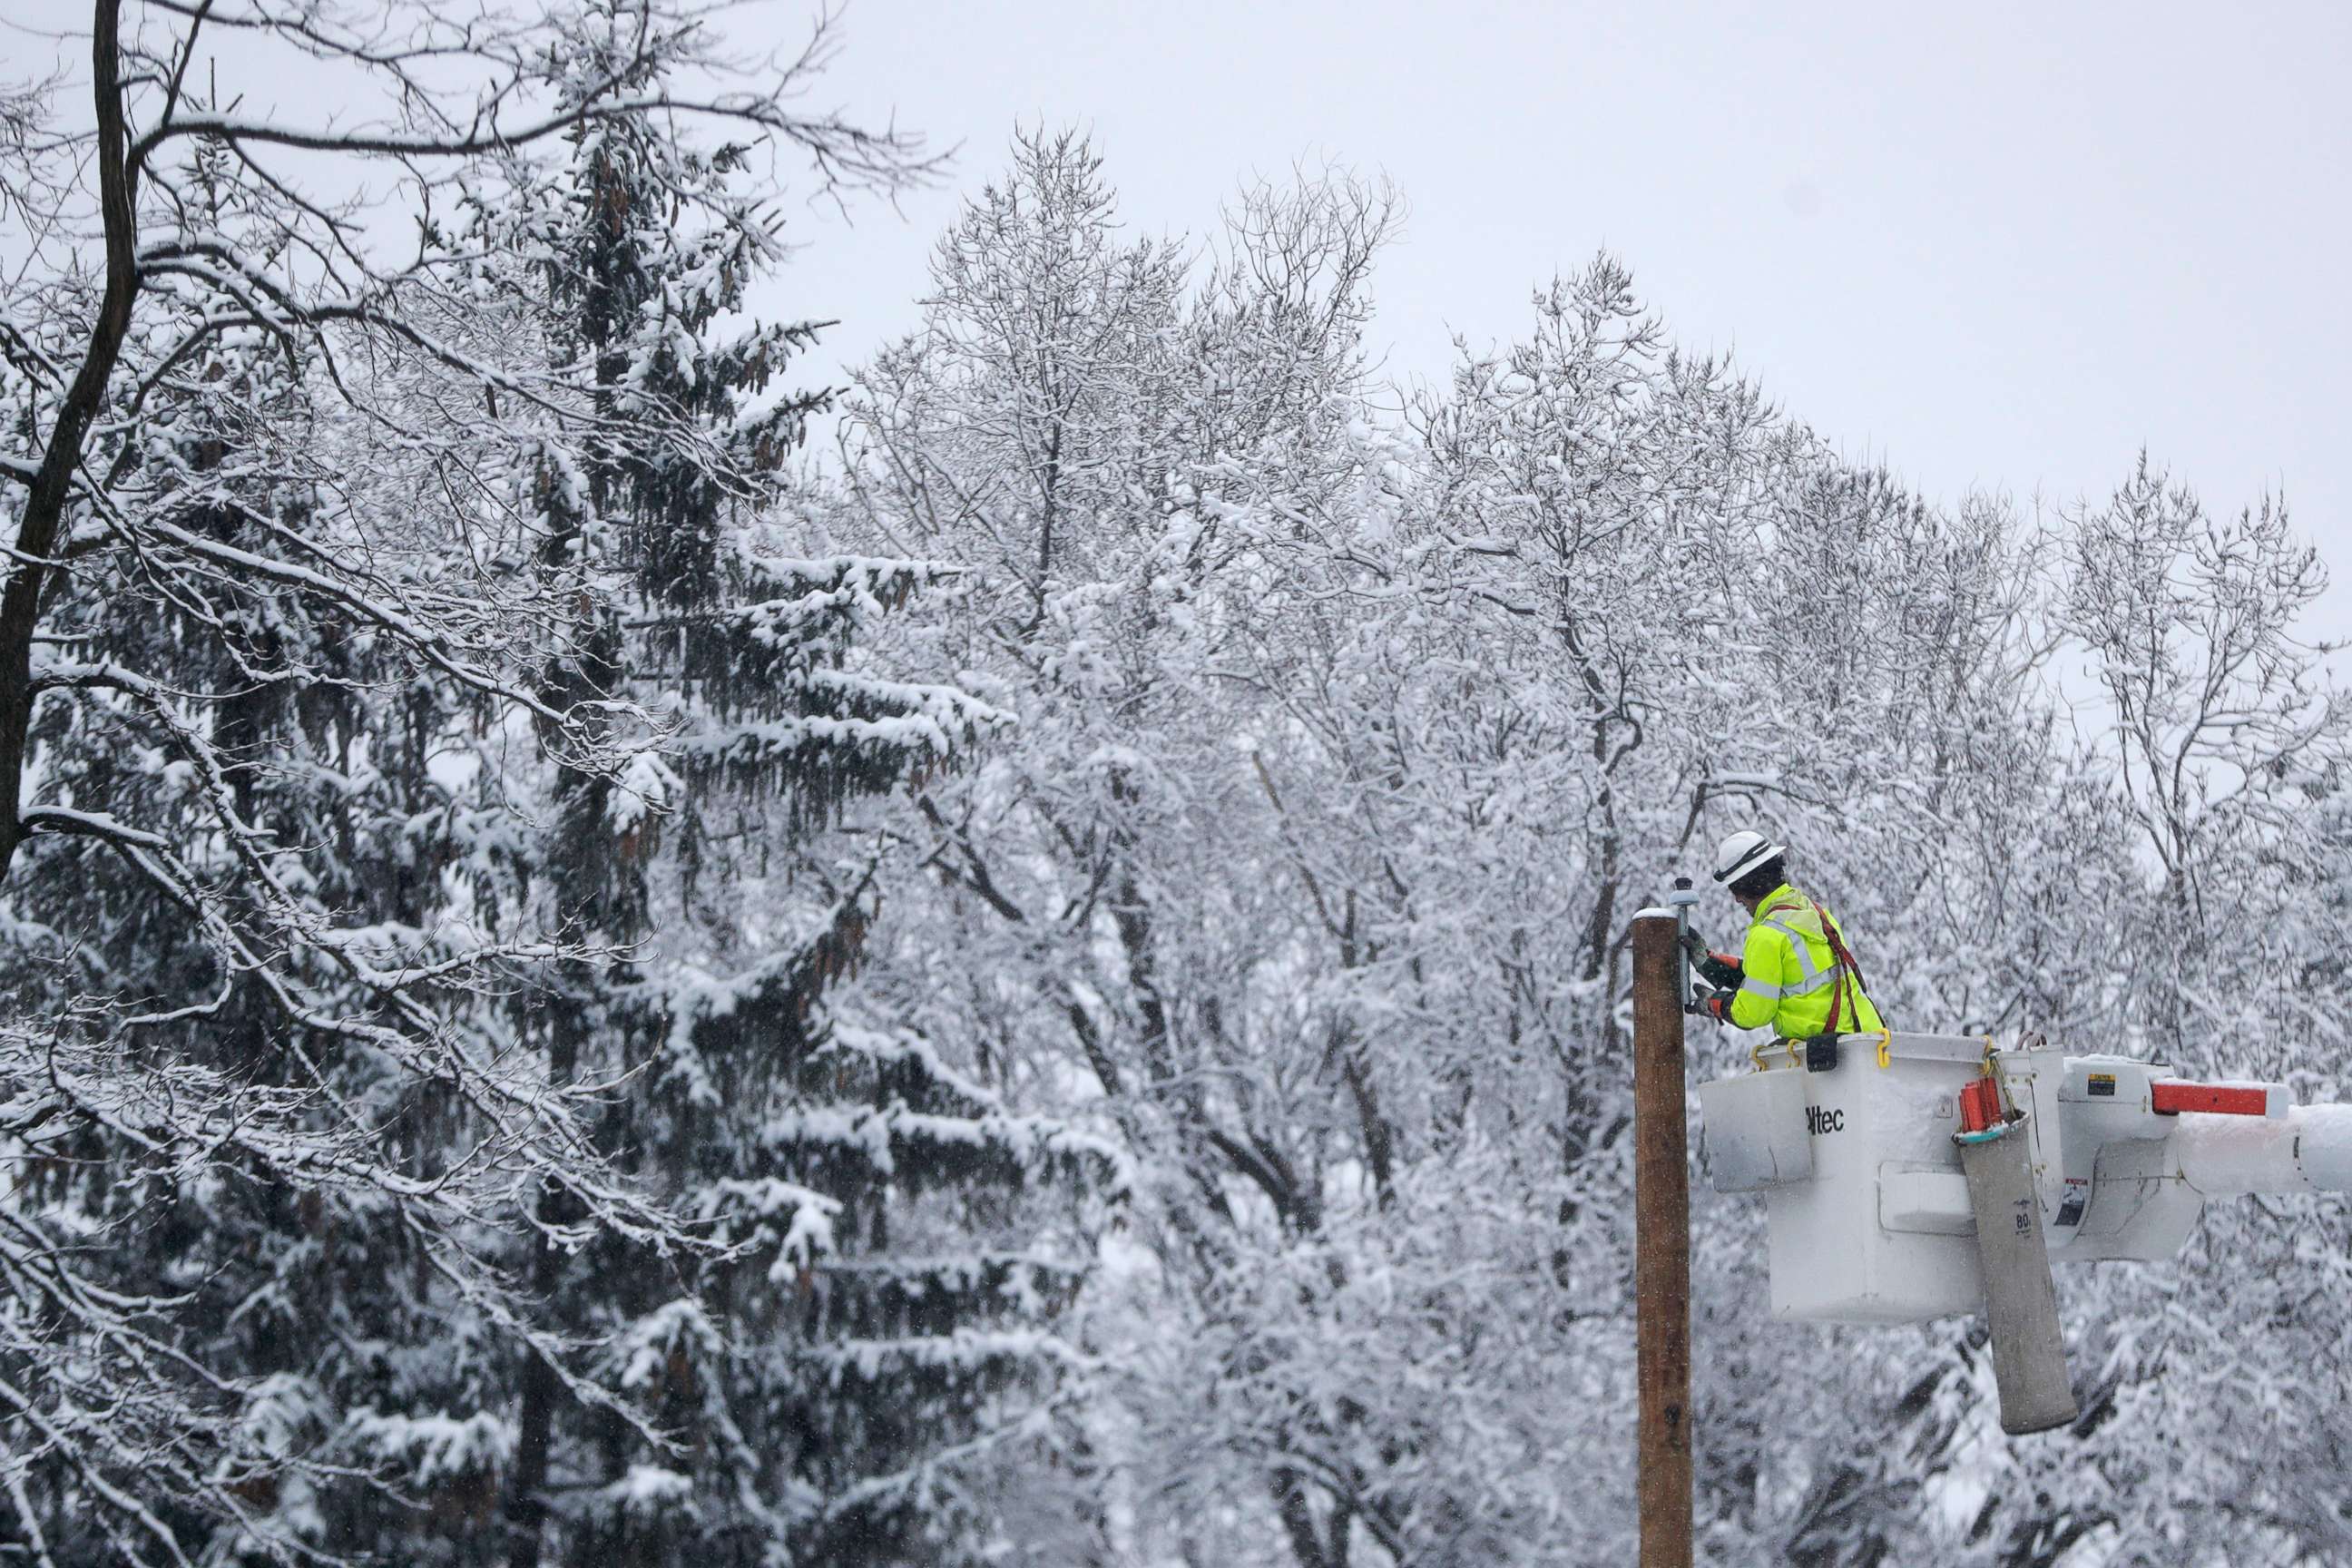 PHOTO: Phil Blair, a utility worker with PotomacEdison out of West Virginia, works on setting up a new power line as a crew works on restoring power along Molly Stark Drive ahead of a winter storm, Wednesday, March 7, 2018, in Morristown, N.J. 